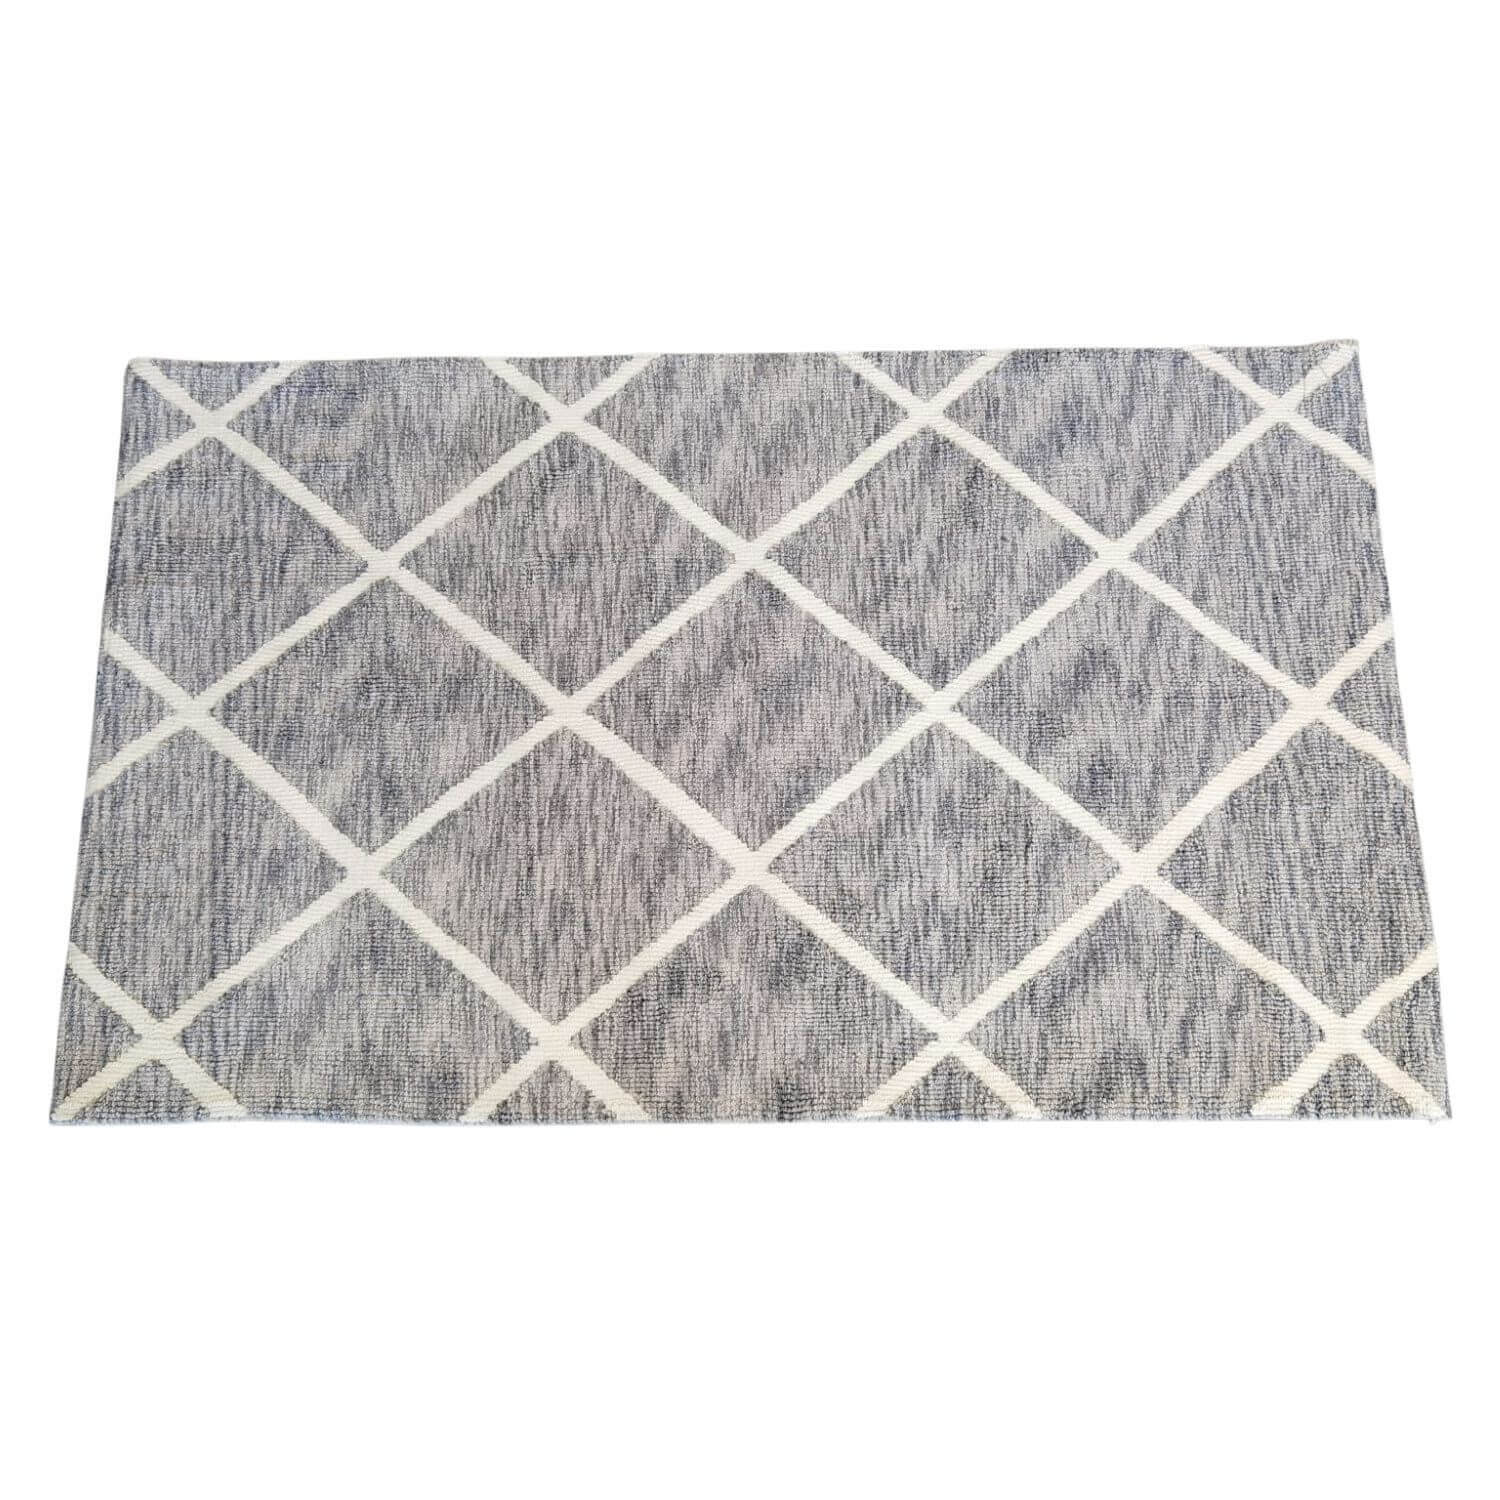 The Home Living Room Sloopy Rug 80x140cm - Grey / White 2 Shaws Department Stores